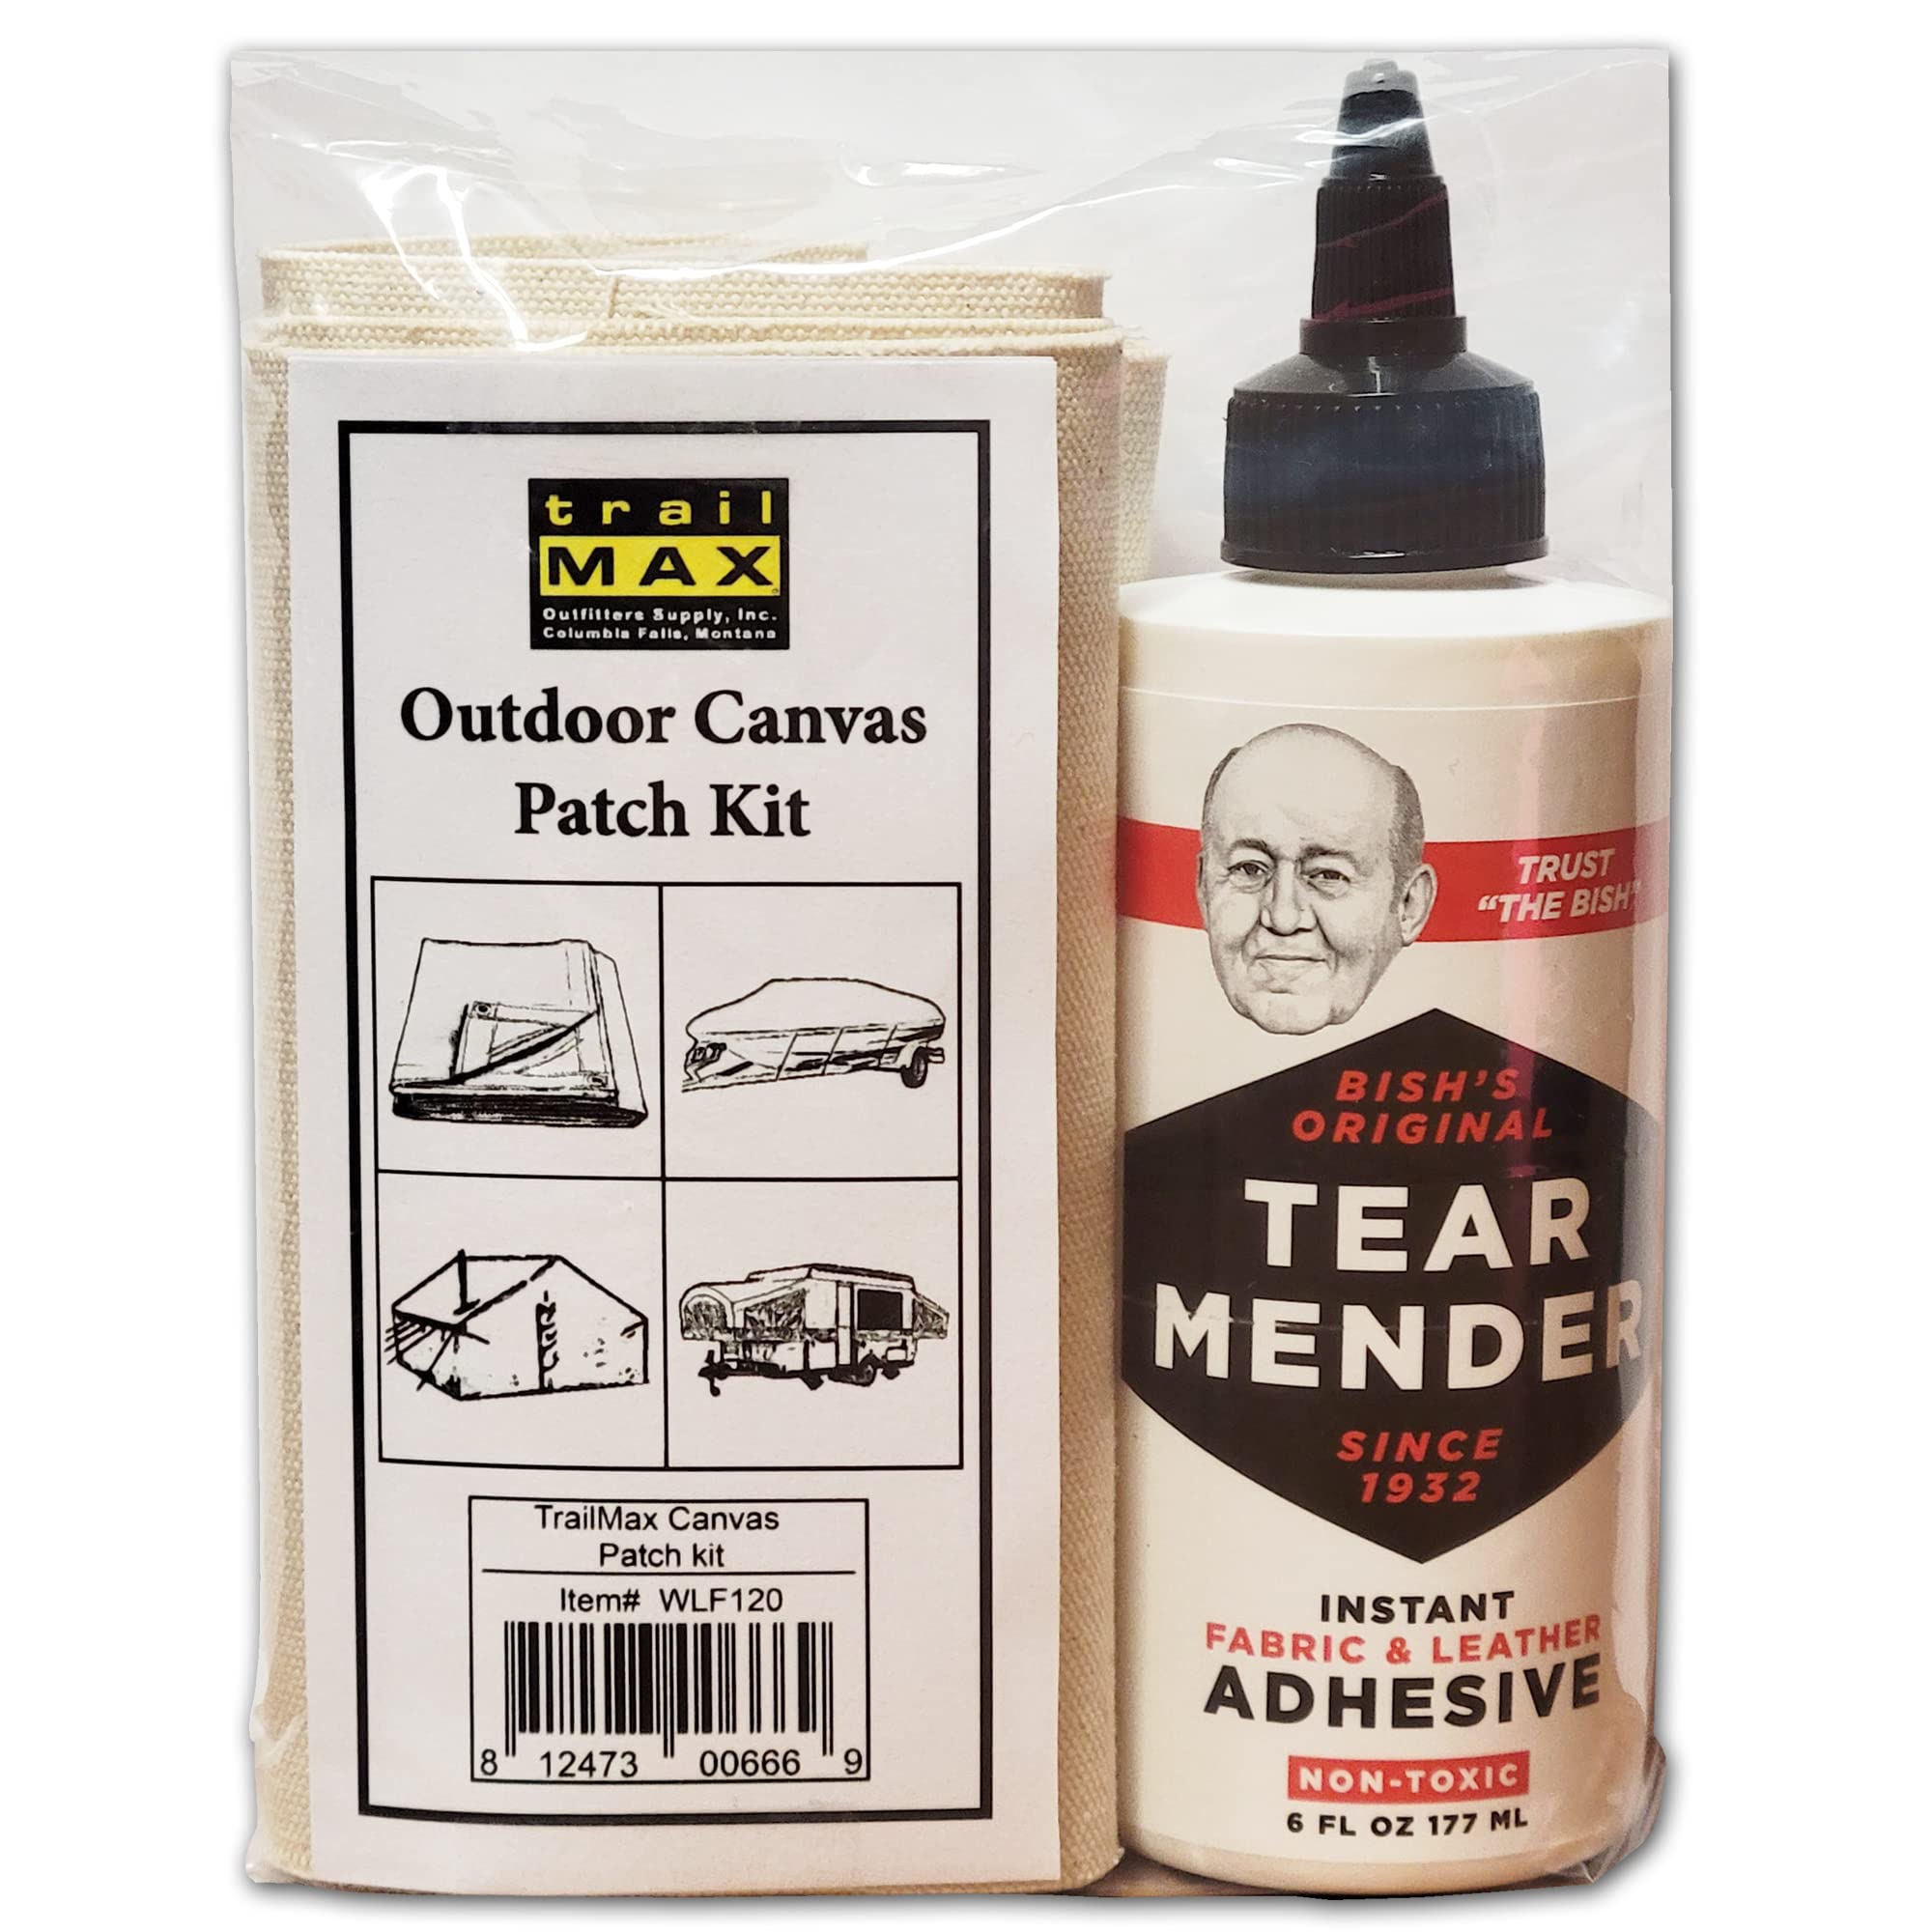 Tear Mender Instant Fabric & Leather Adhesive 6oz